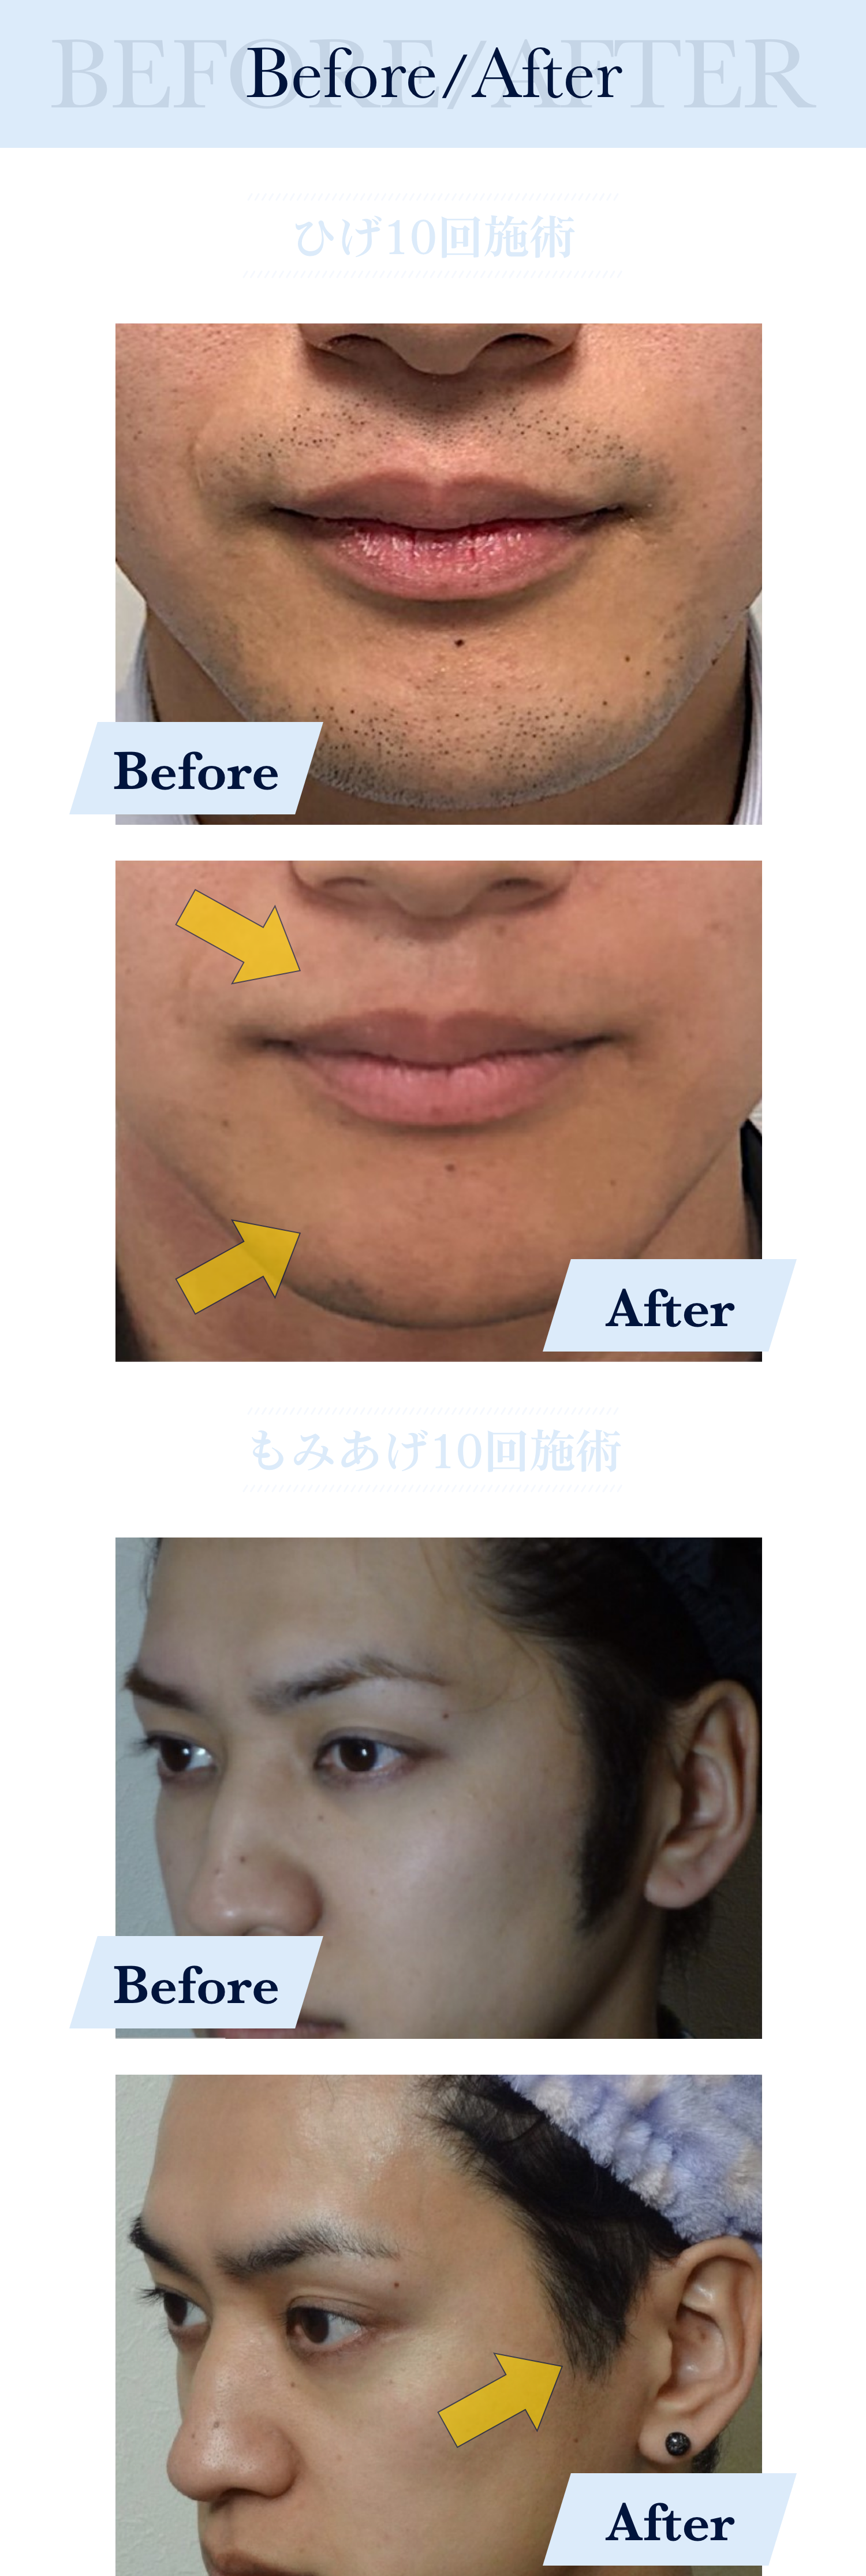 Before/After ひげ10回施術 Before After もみあげ10回施術 Before After